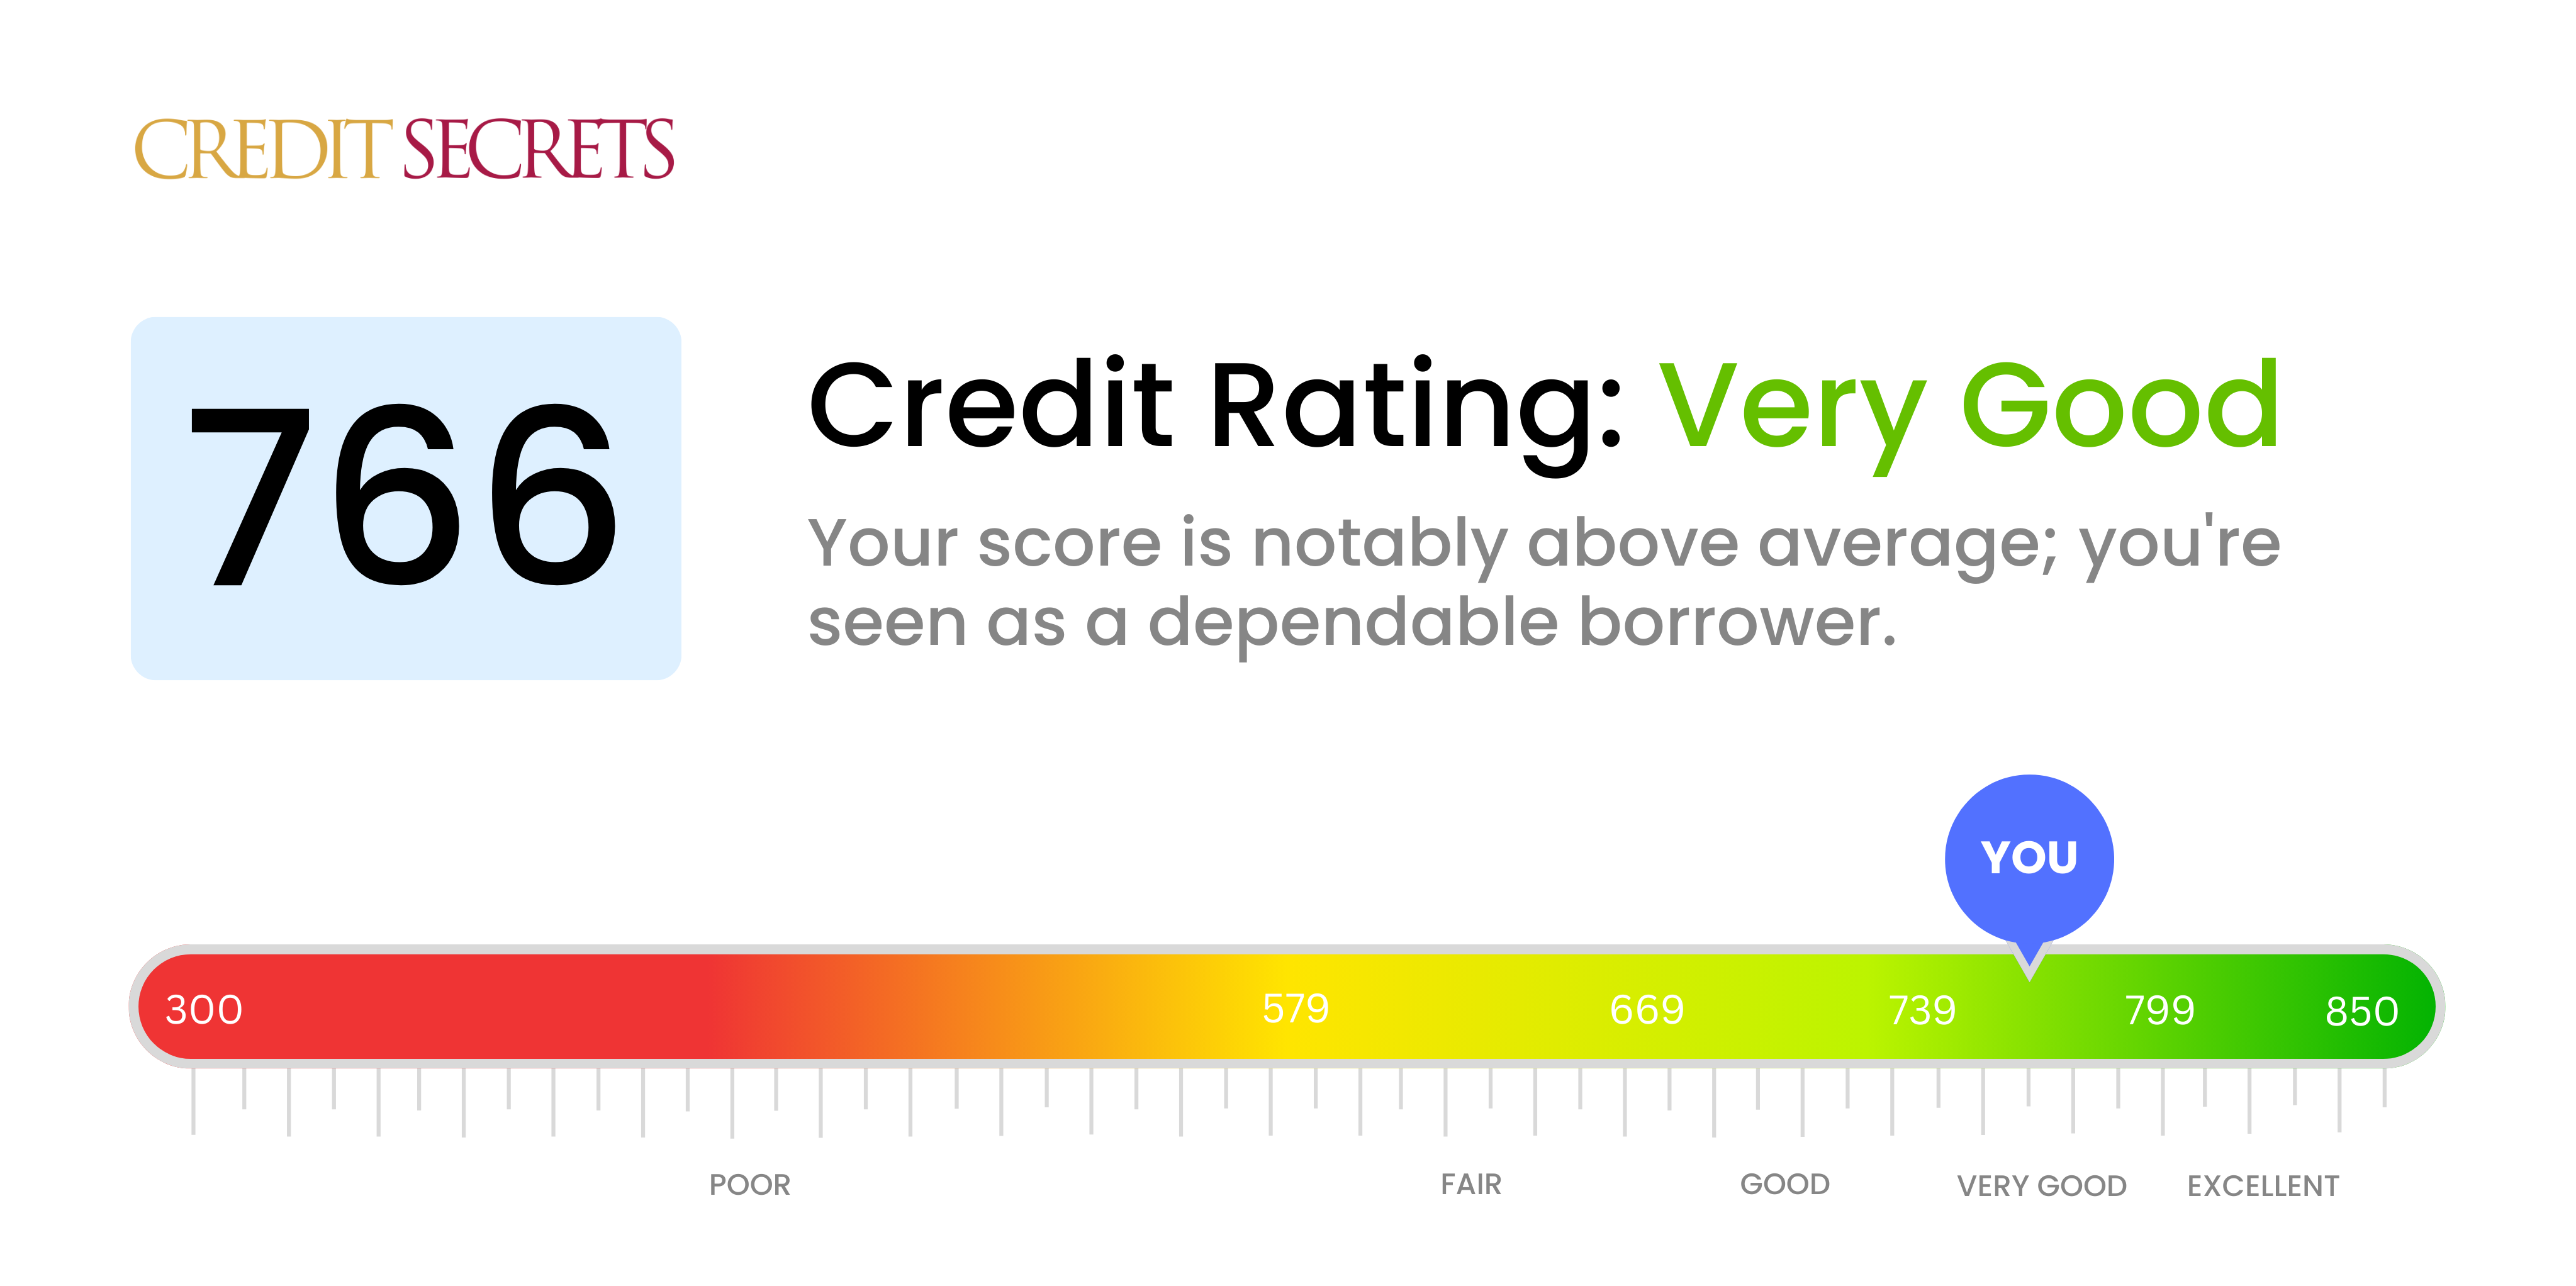 Is 766 a good credit score?